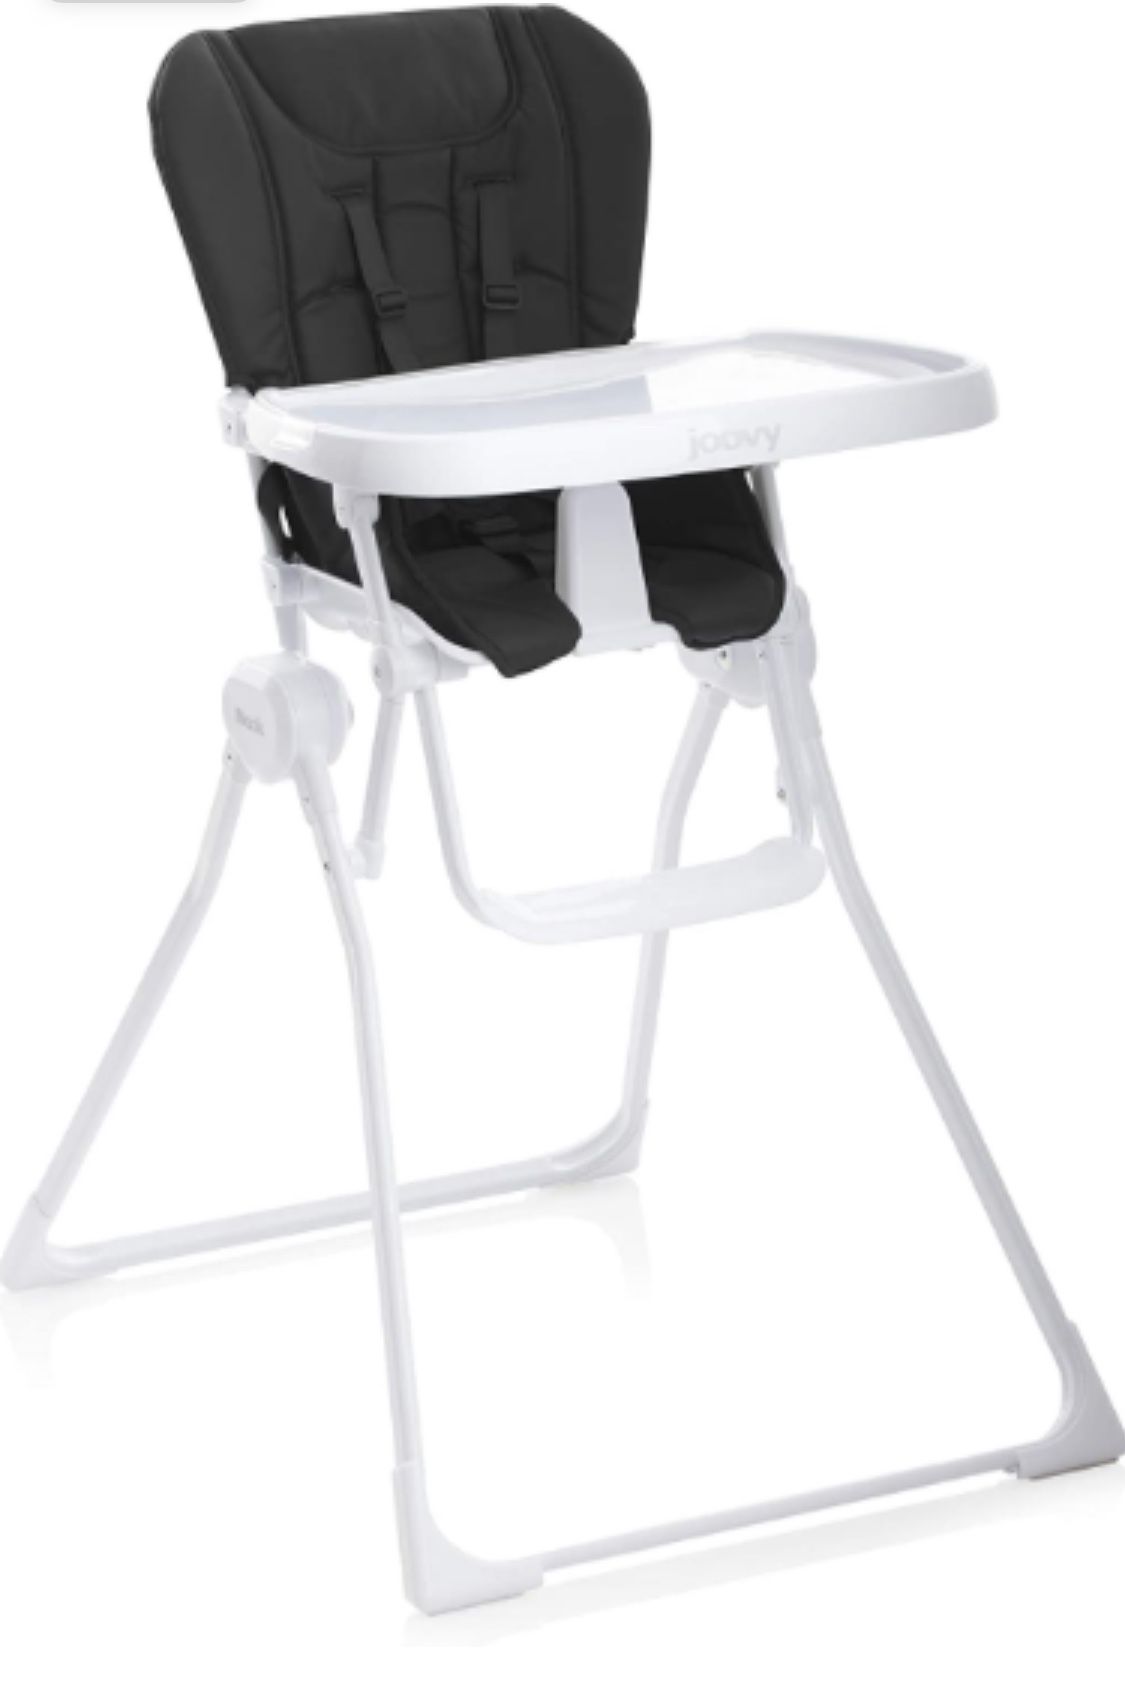 Collapsible high chair